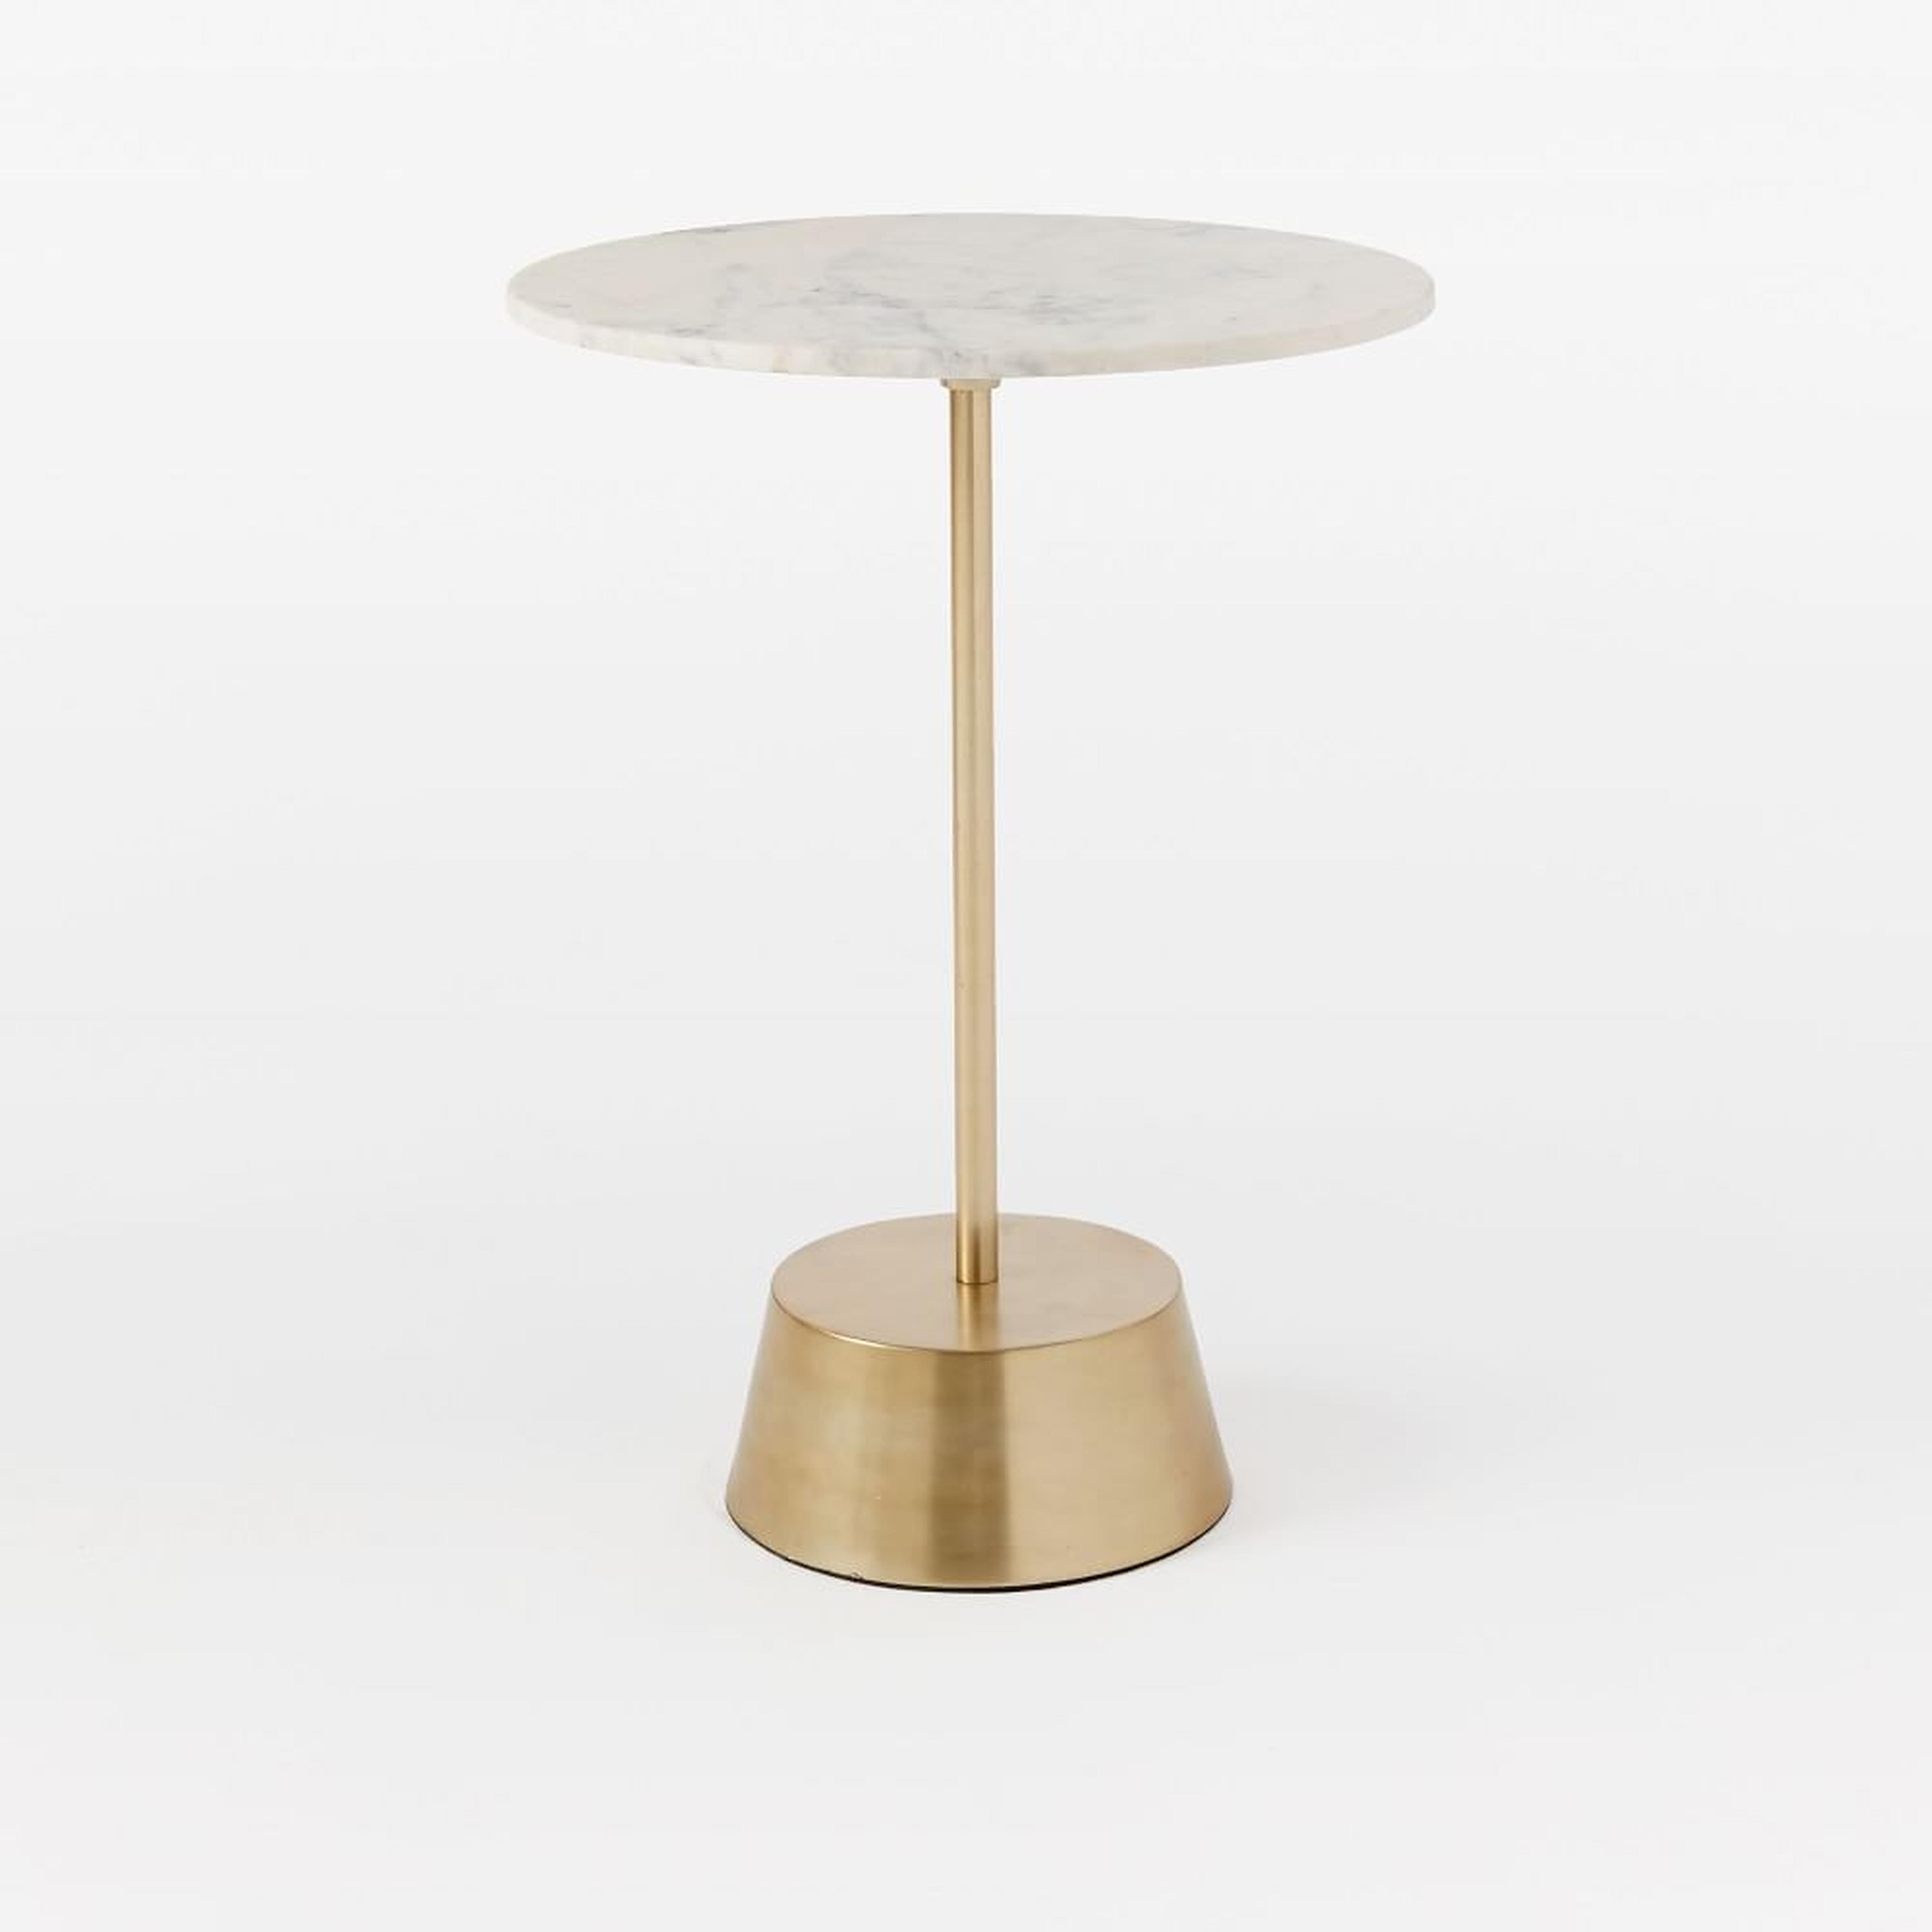 Maisie Side Table, Tall, White Marble & Antique Brass - West Elm